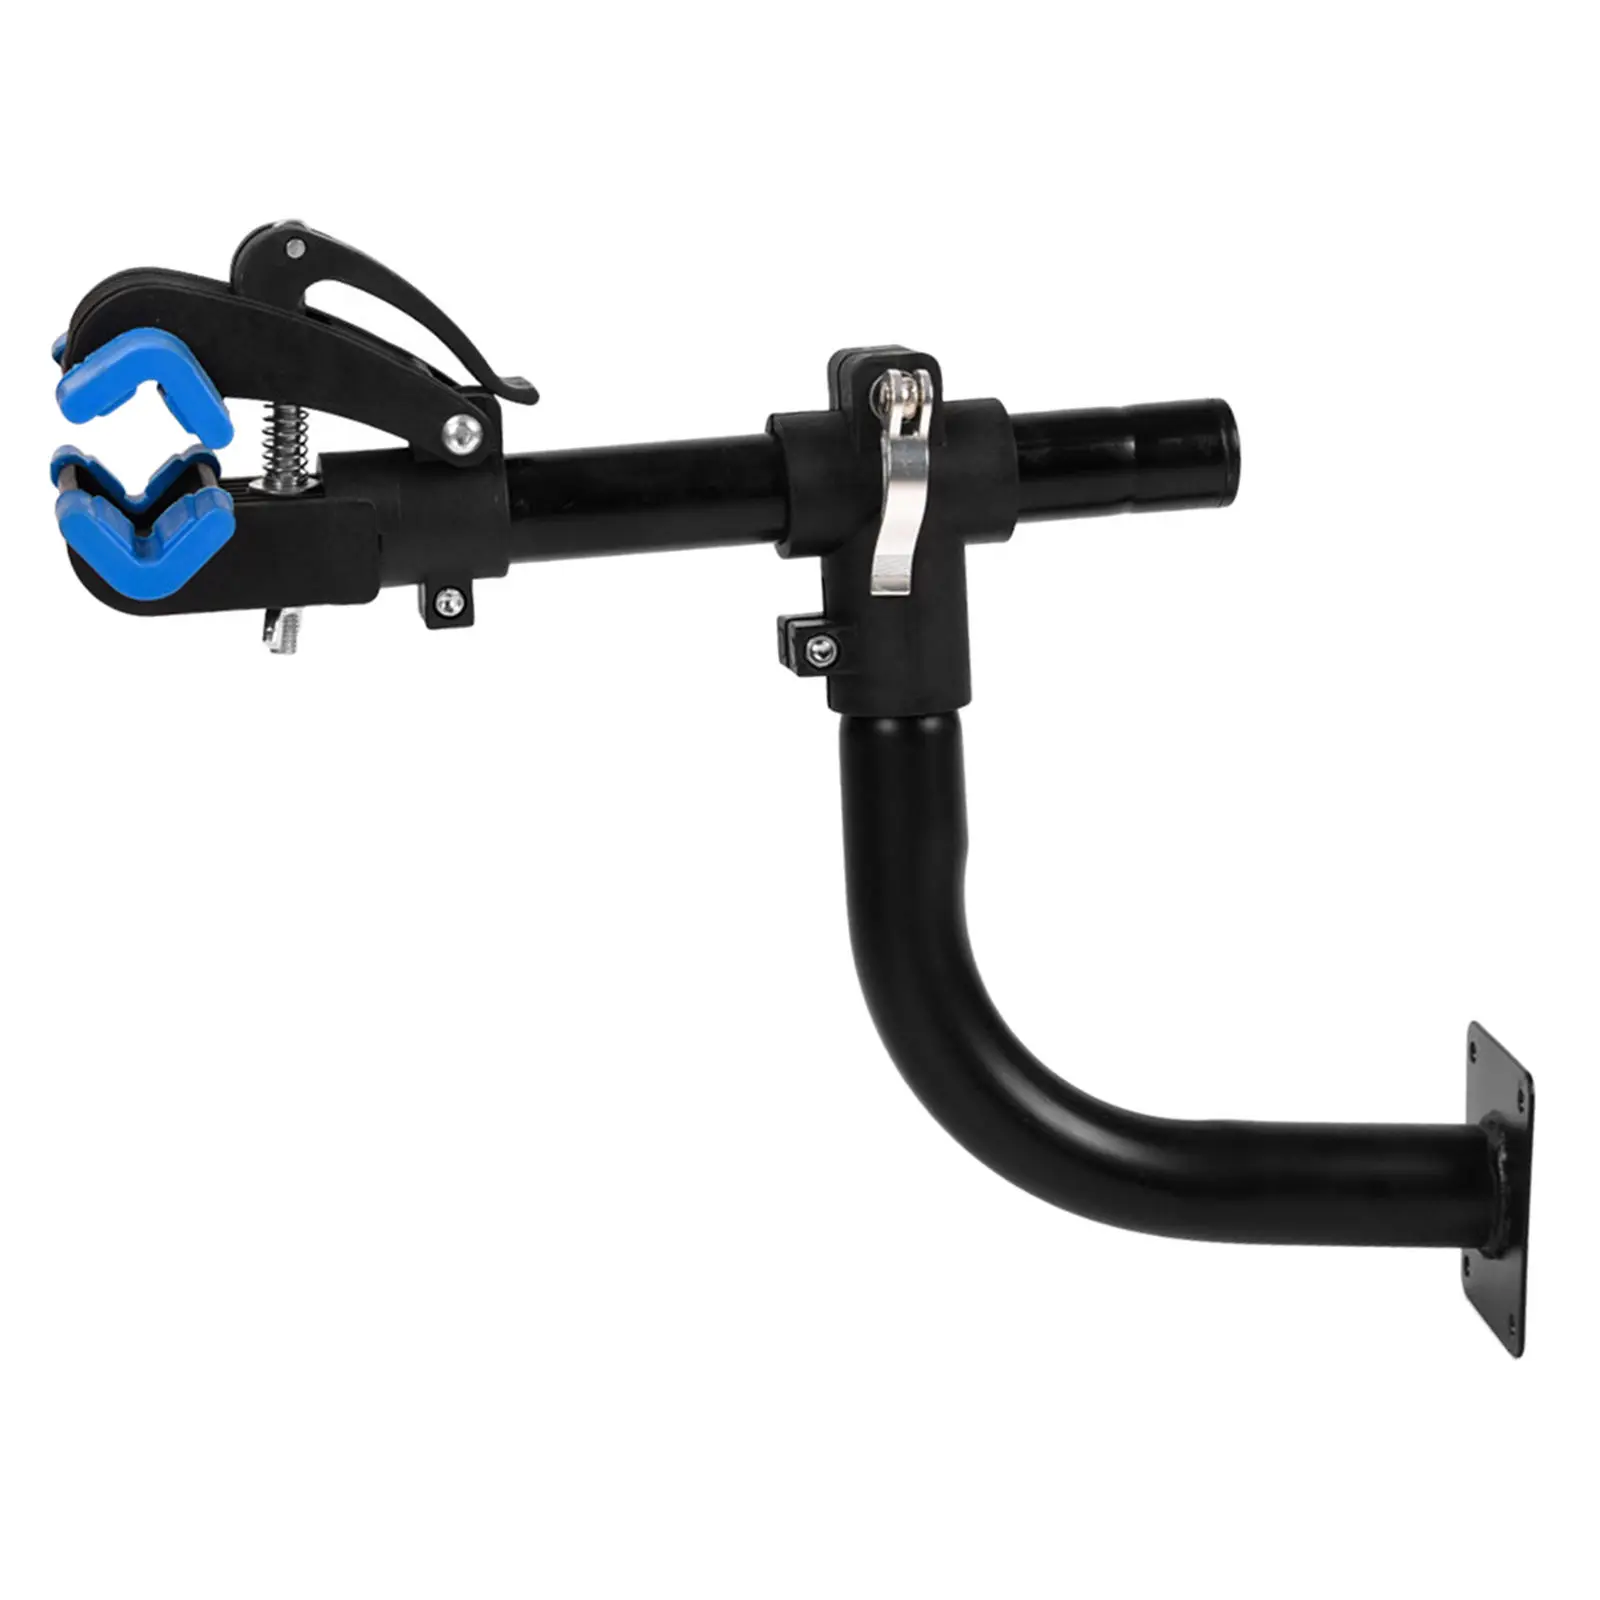 Adjustable Bicycle Wall Mount Rack Hanger Bike Repair Stand Home Maintenance Clamp Holder Garage Mechanic Workstand Clamp Clip